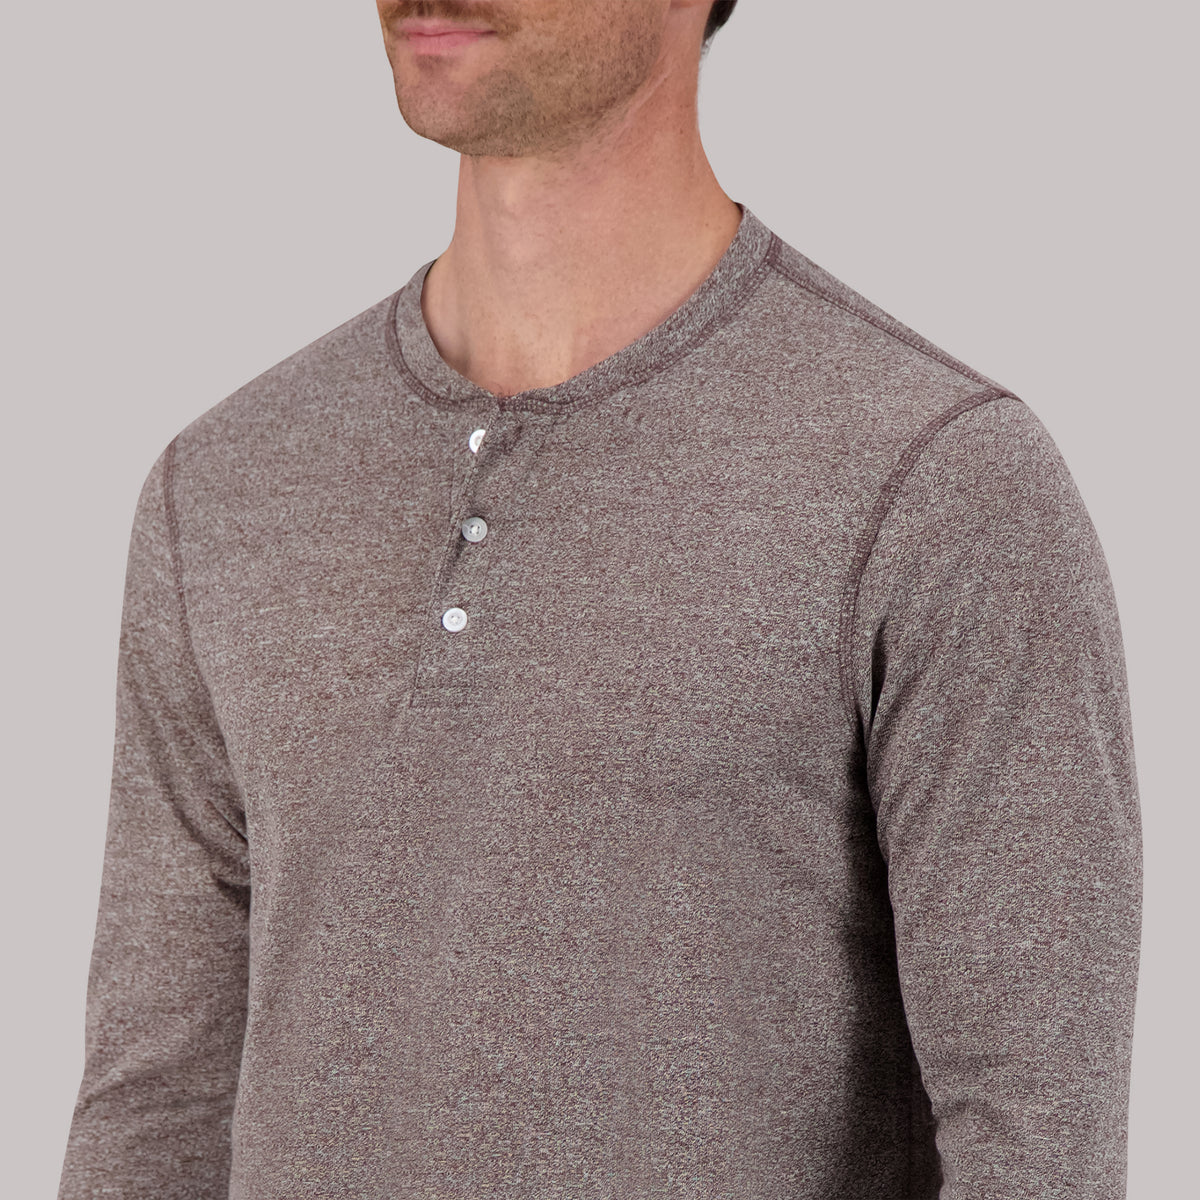 Long Sleeve Cotton/Poly Henley Grindal Knit in Truffle